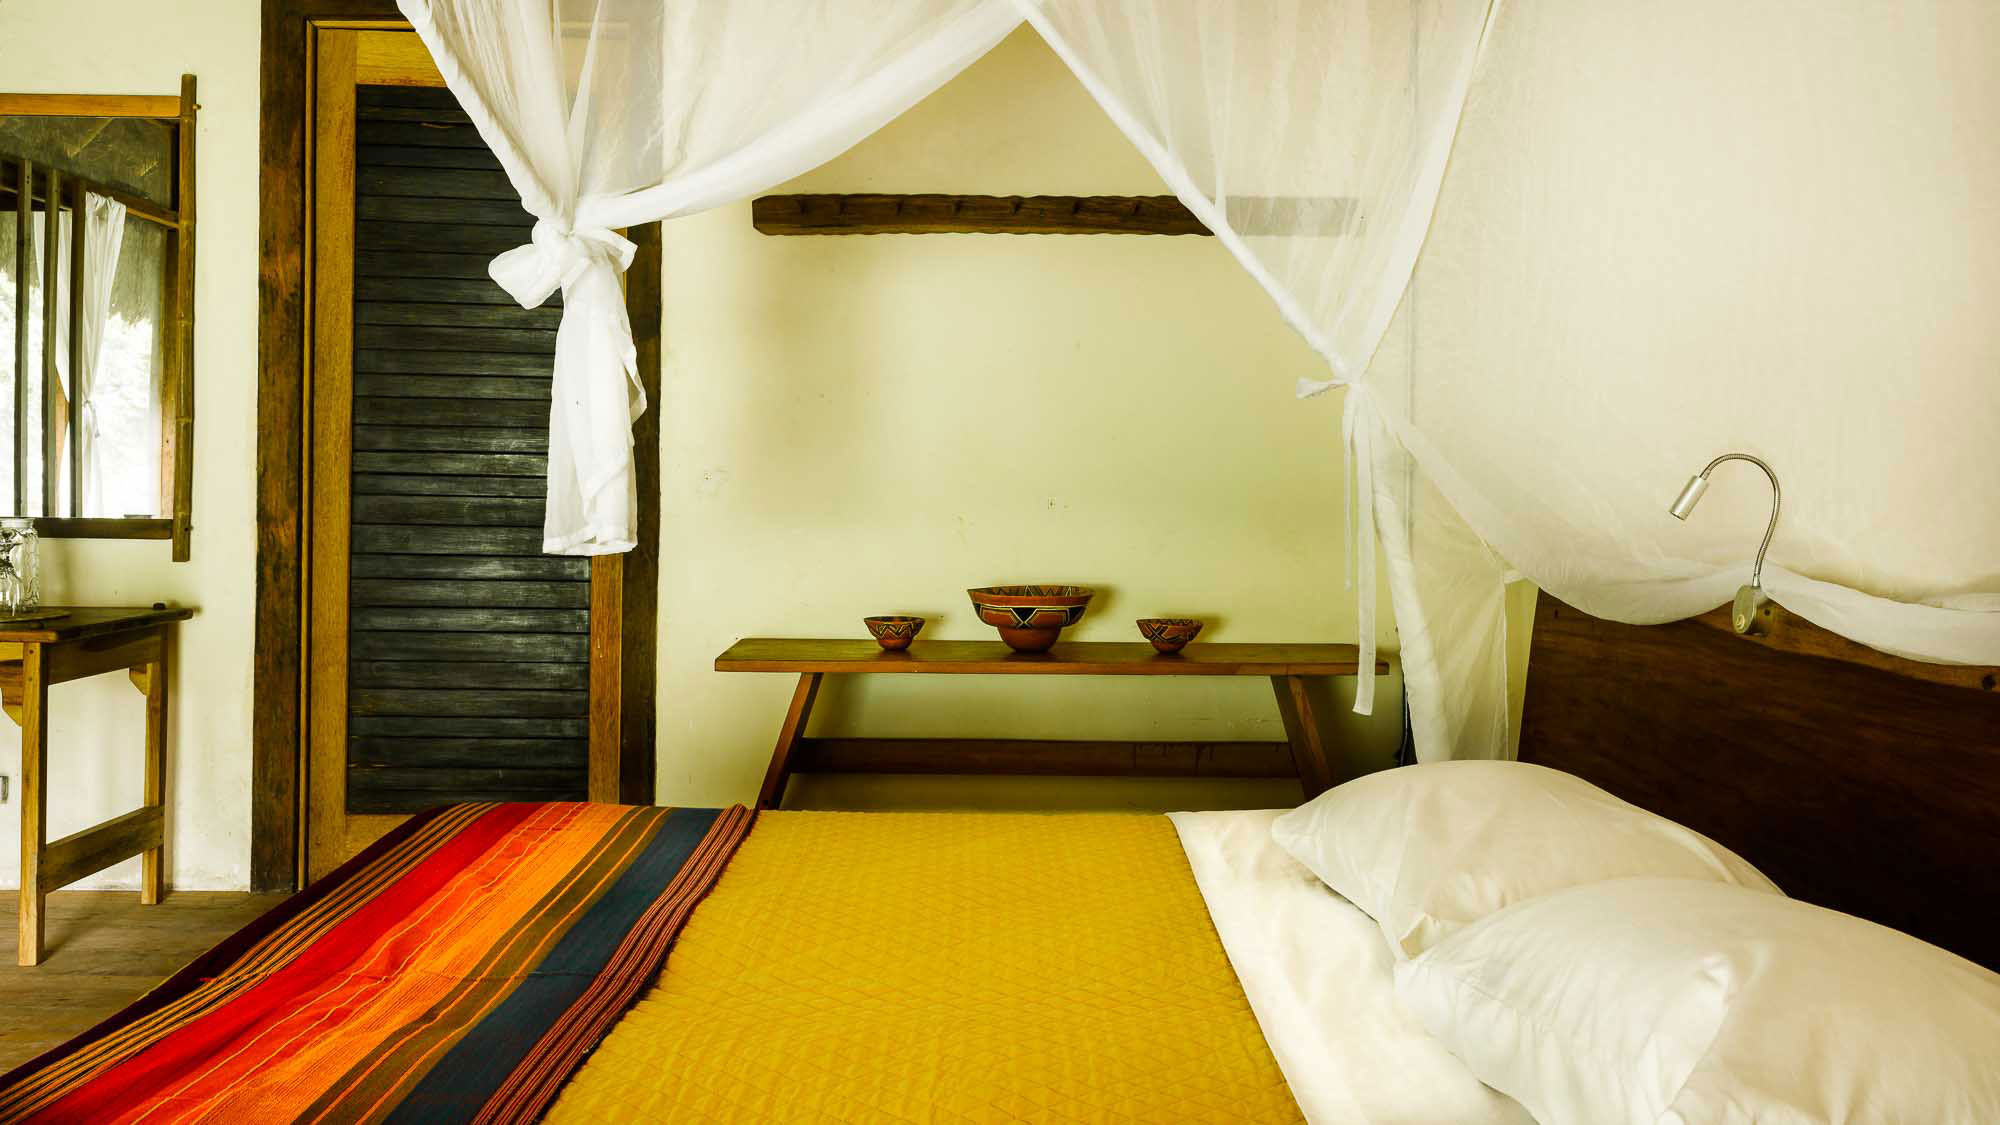 The interior of one of the bungalows at the Kapawi Ecolodge.